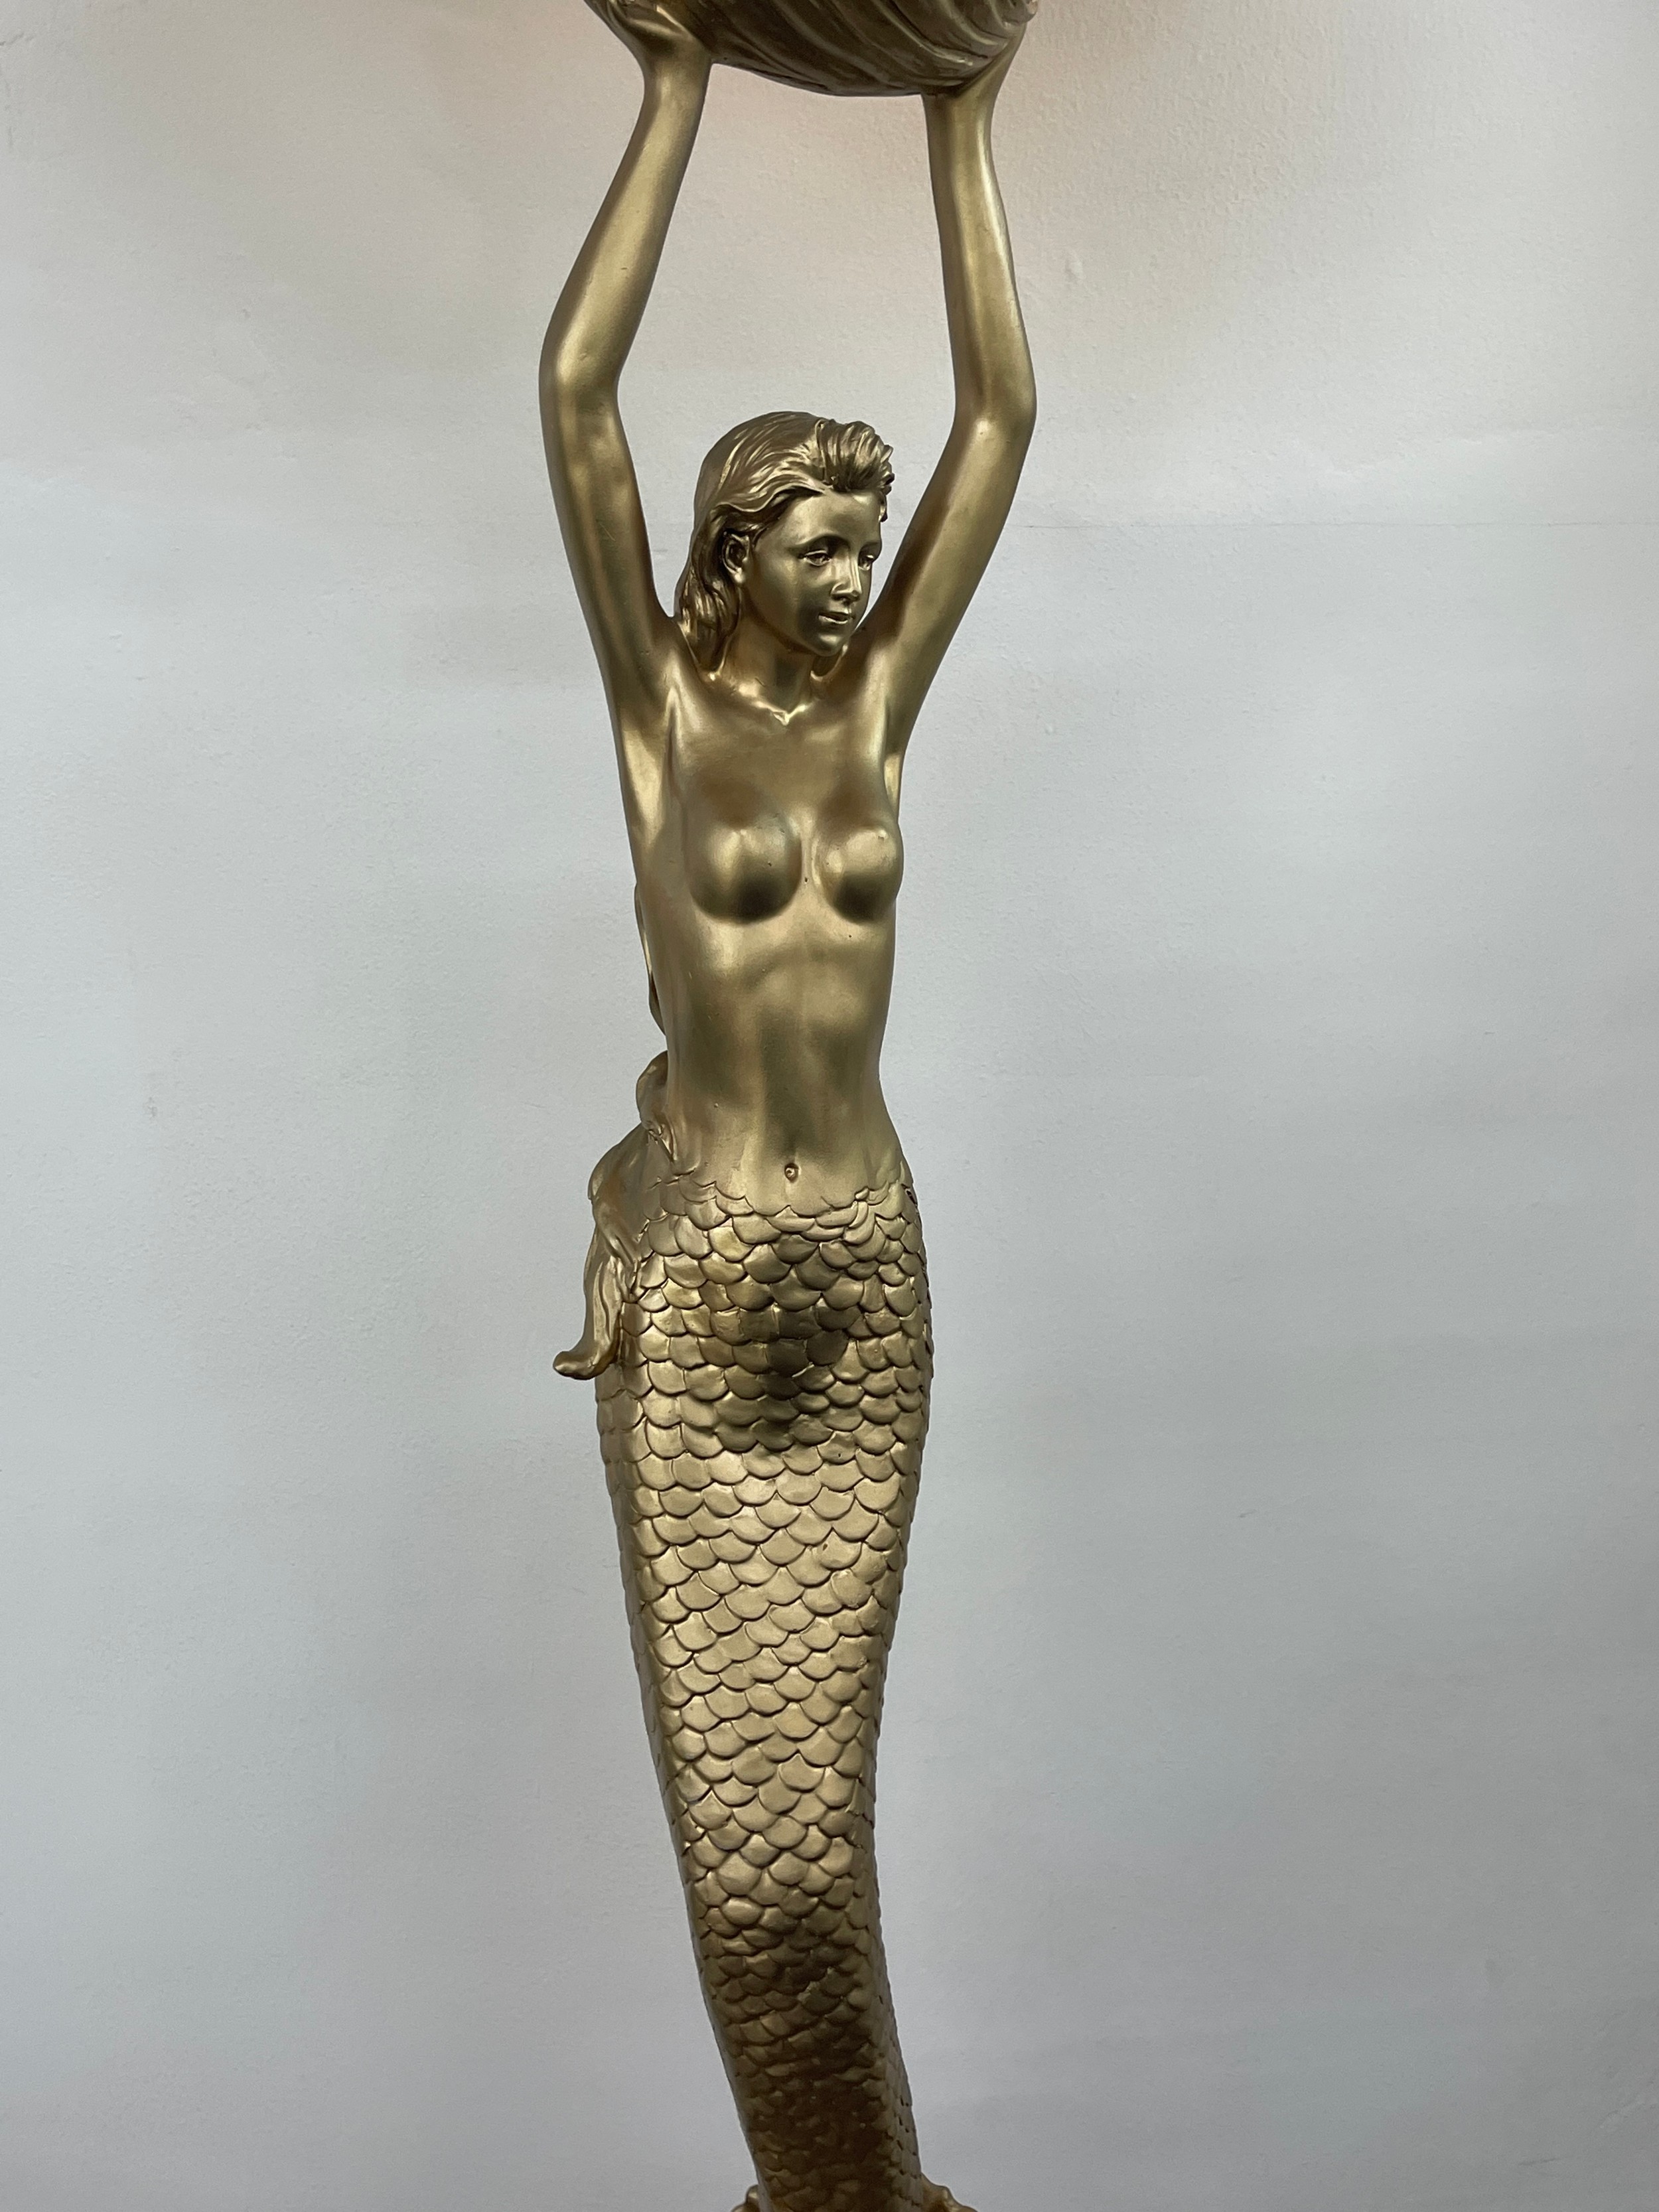 Tall mermaid resin lamp on plinth, approximately 75.5 inches tall, working order with glass shade - Image 9 of 11